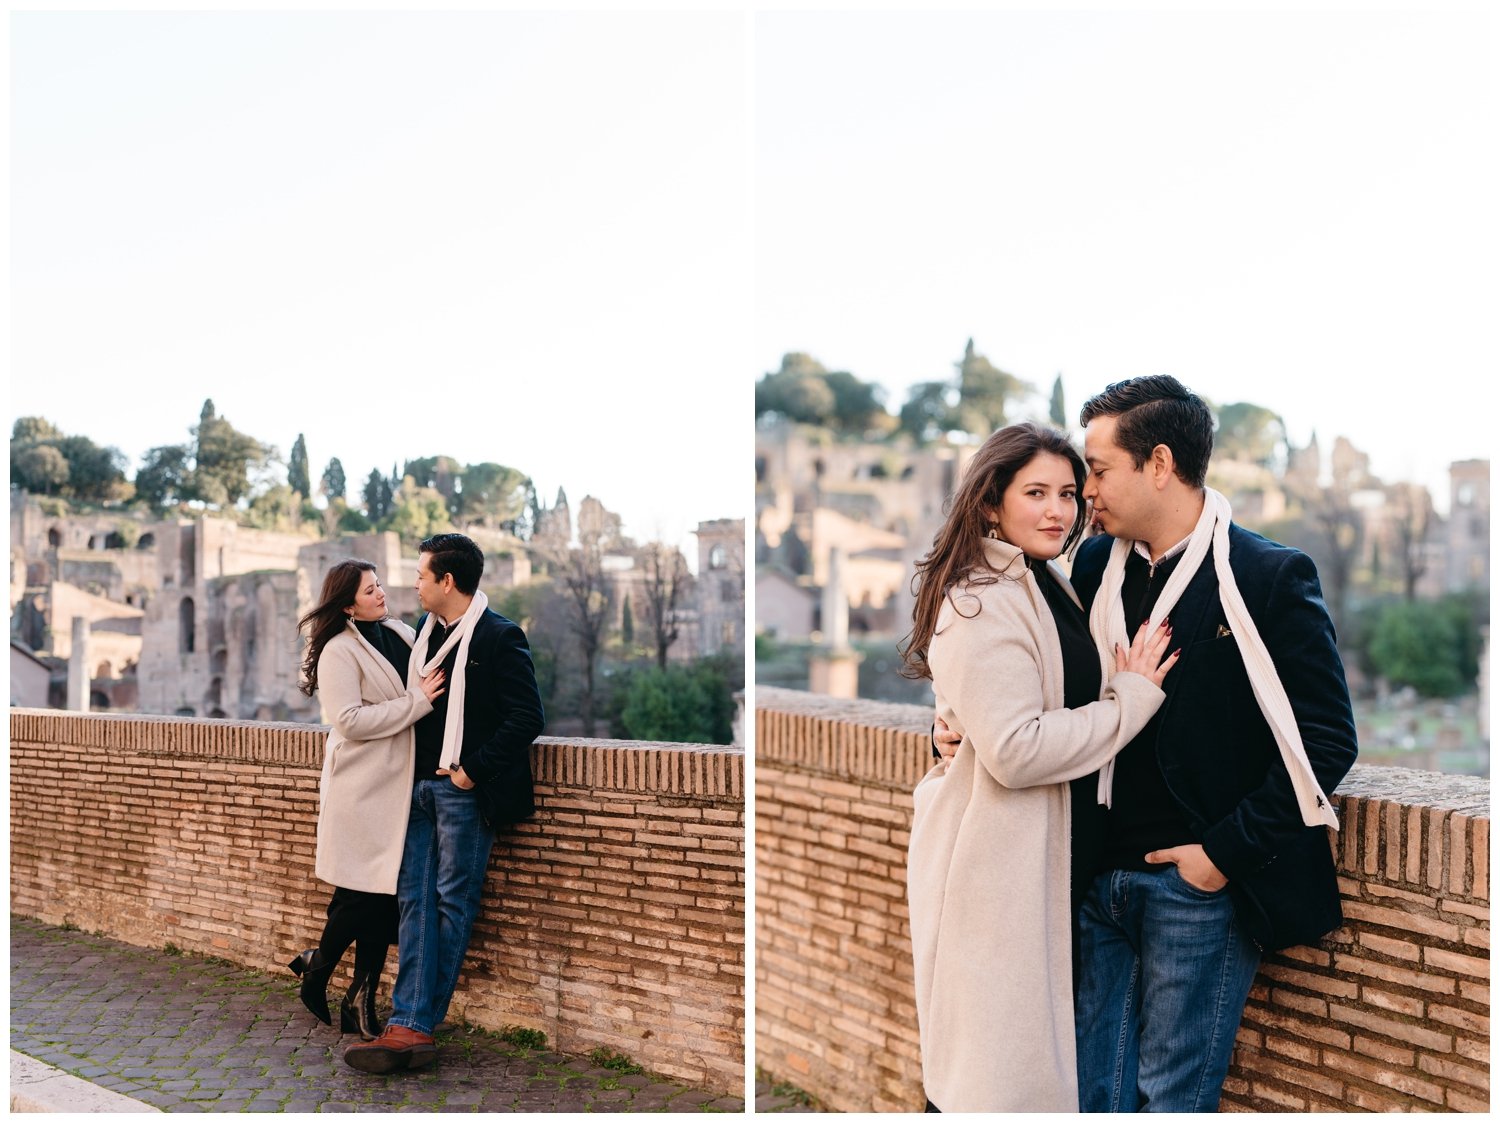 The couple leans on a brick wall